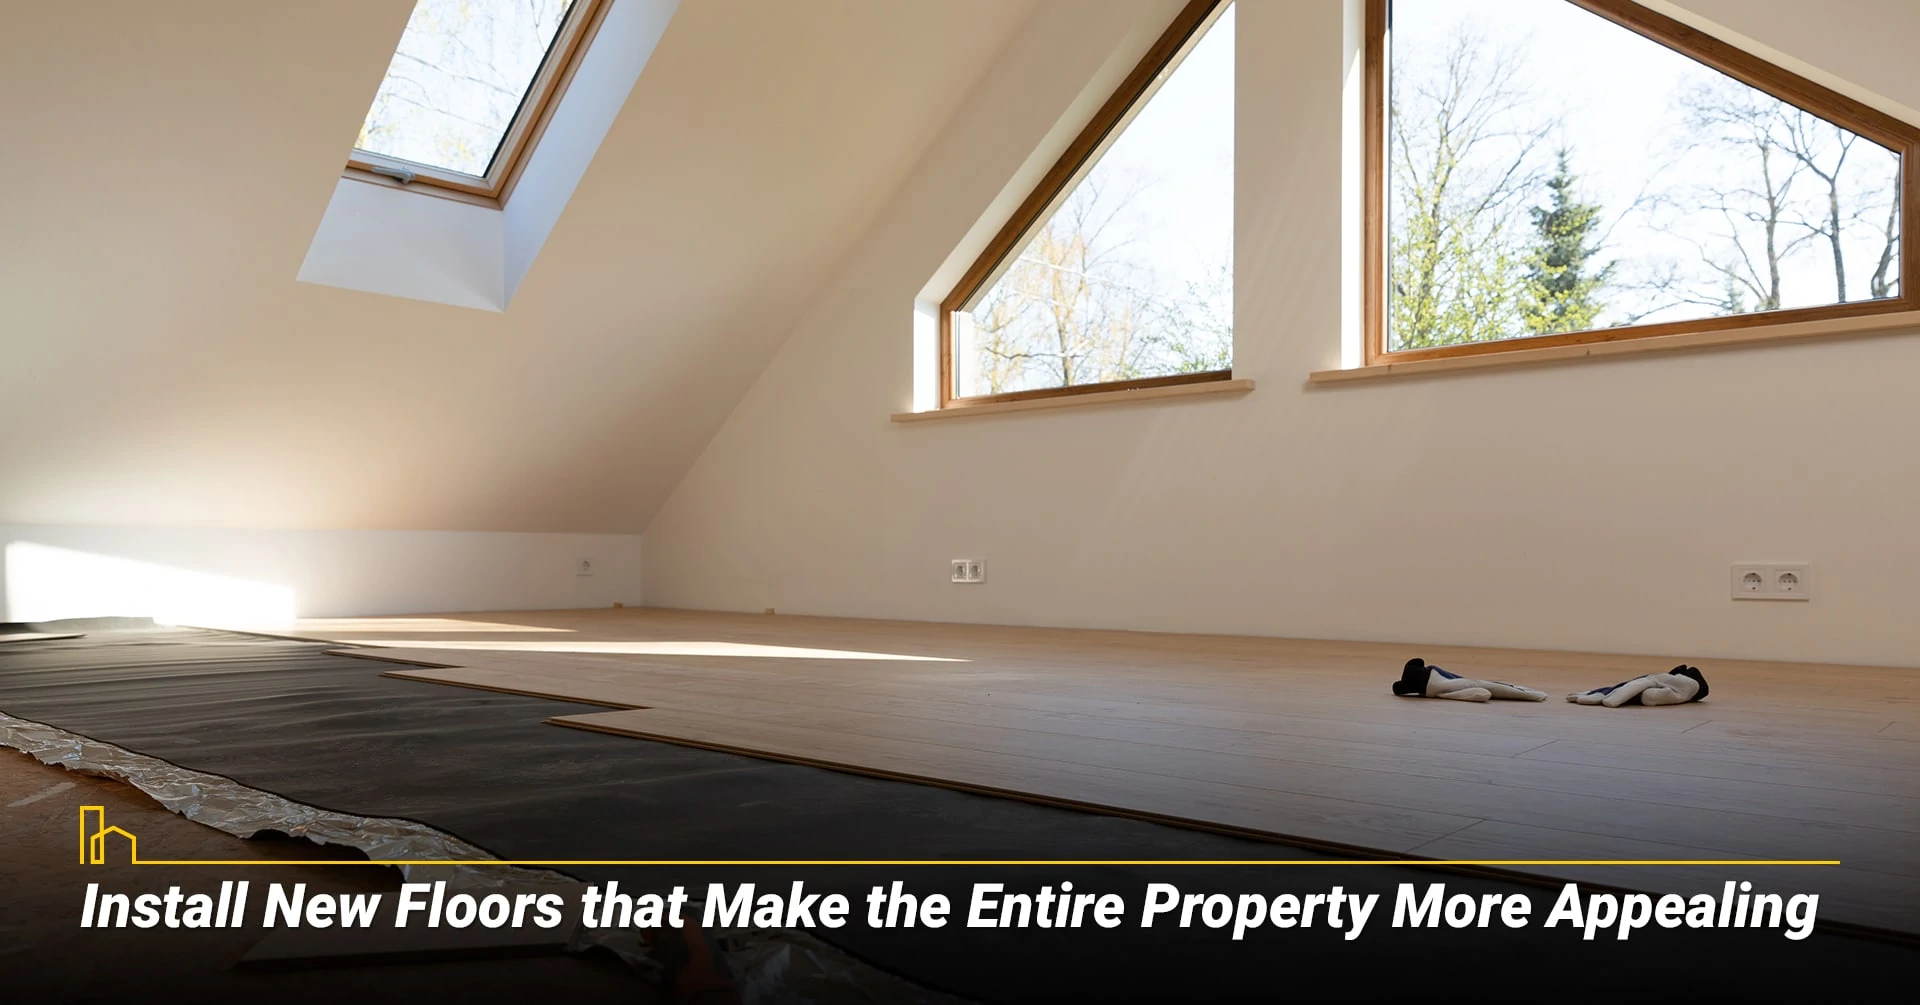 Install New Floors that Make the Entire Property More Appealing, upgrade your floor